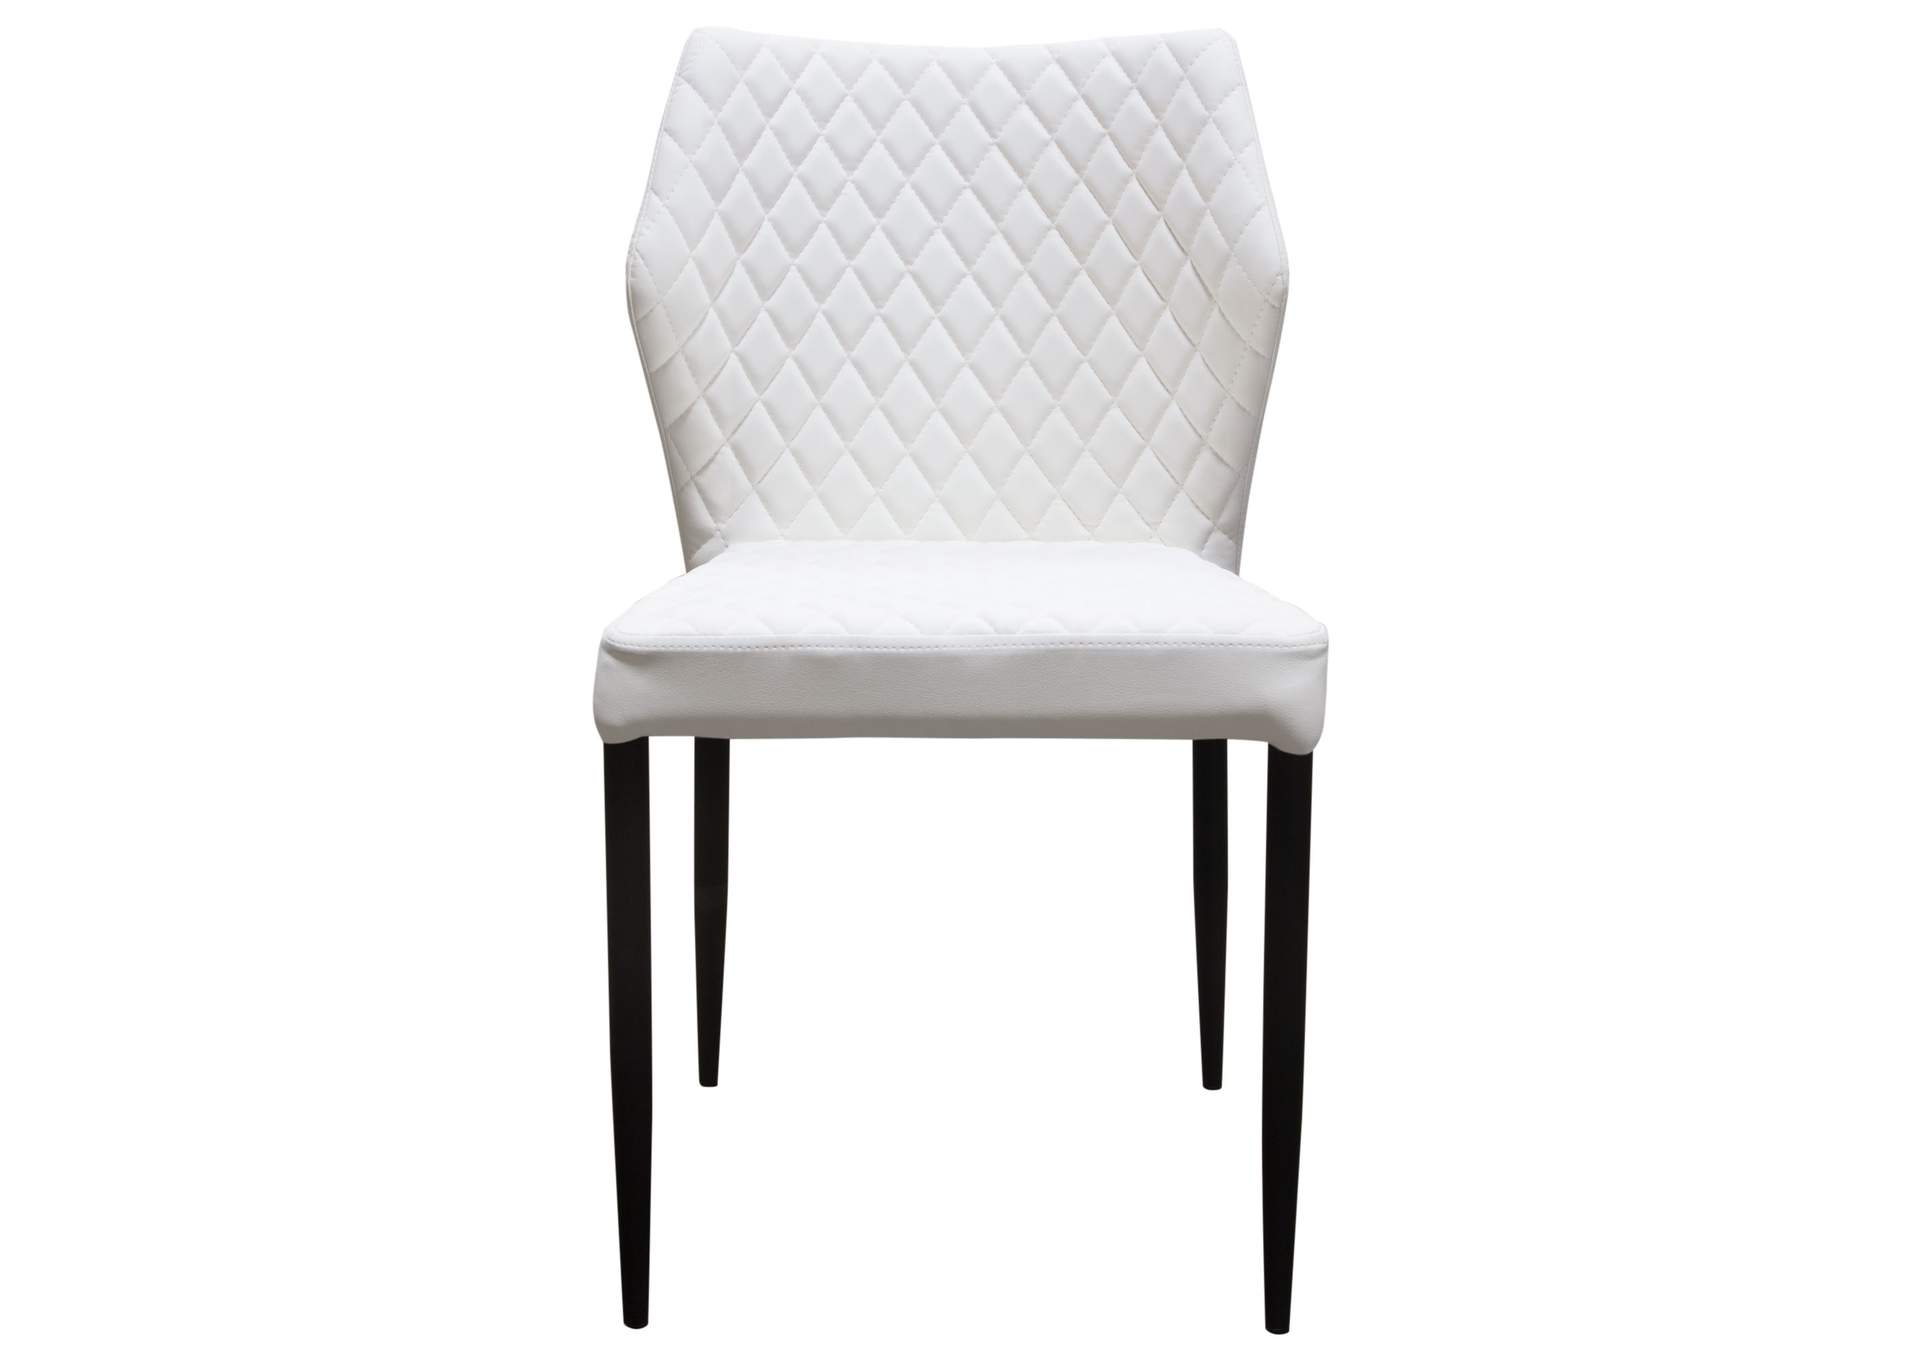 Milo 4-Pack Dining Chairs in White Diamond Tufted Leatherette with Black Powder Coat Legs by Diamond Sofa,Diamond Sofa